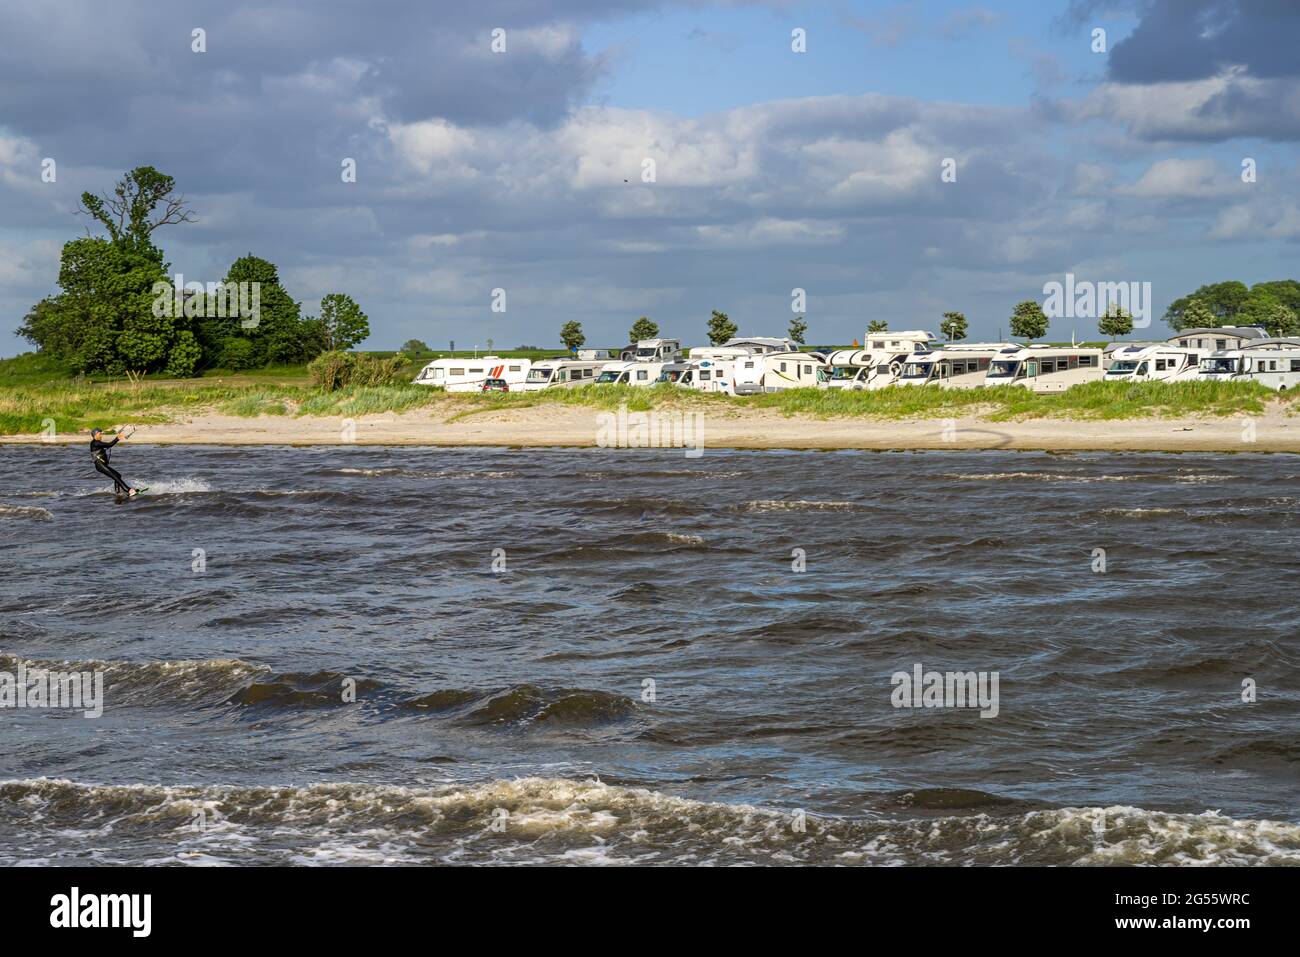 June 13, 2021 - Malmo, Sweden: RVs parked by a beach a windy summer day. The sales of RVs have increased since the pandemic has made international travel more difficult Stock Photo